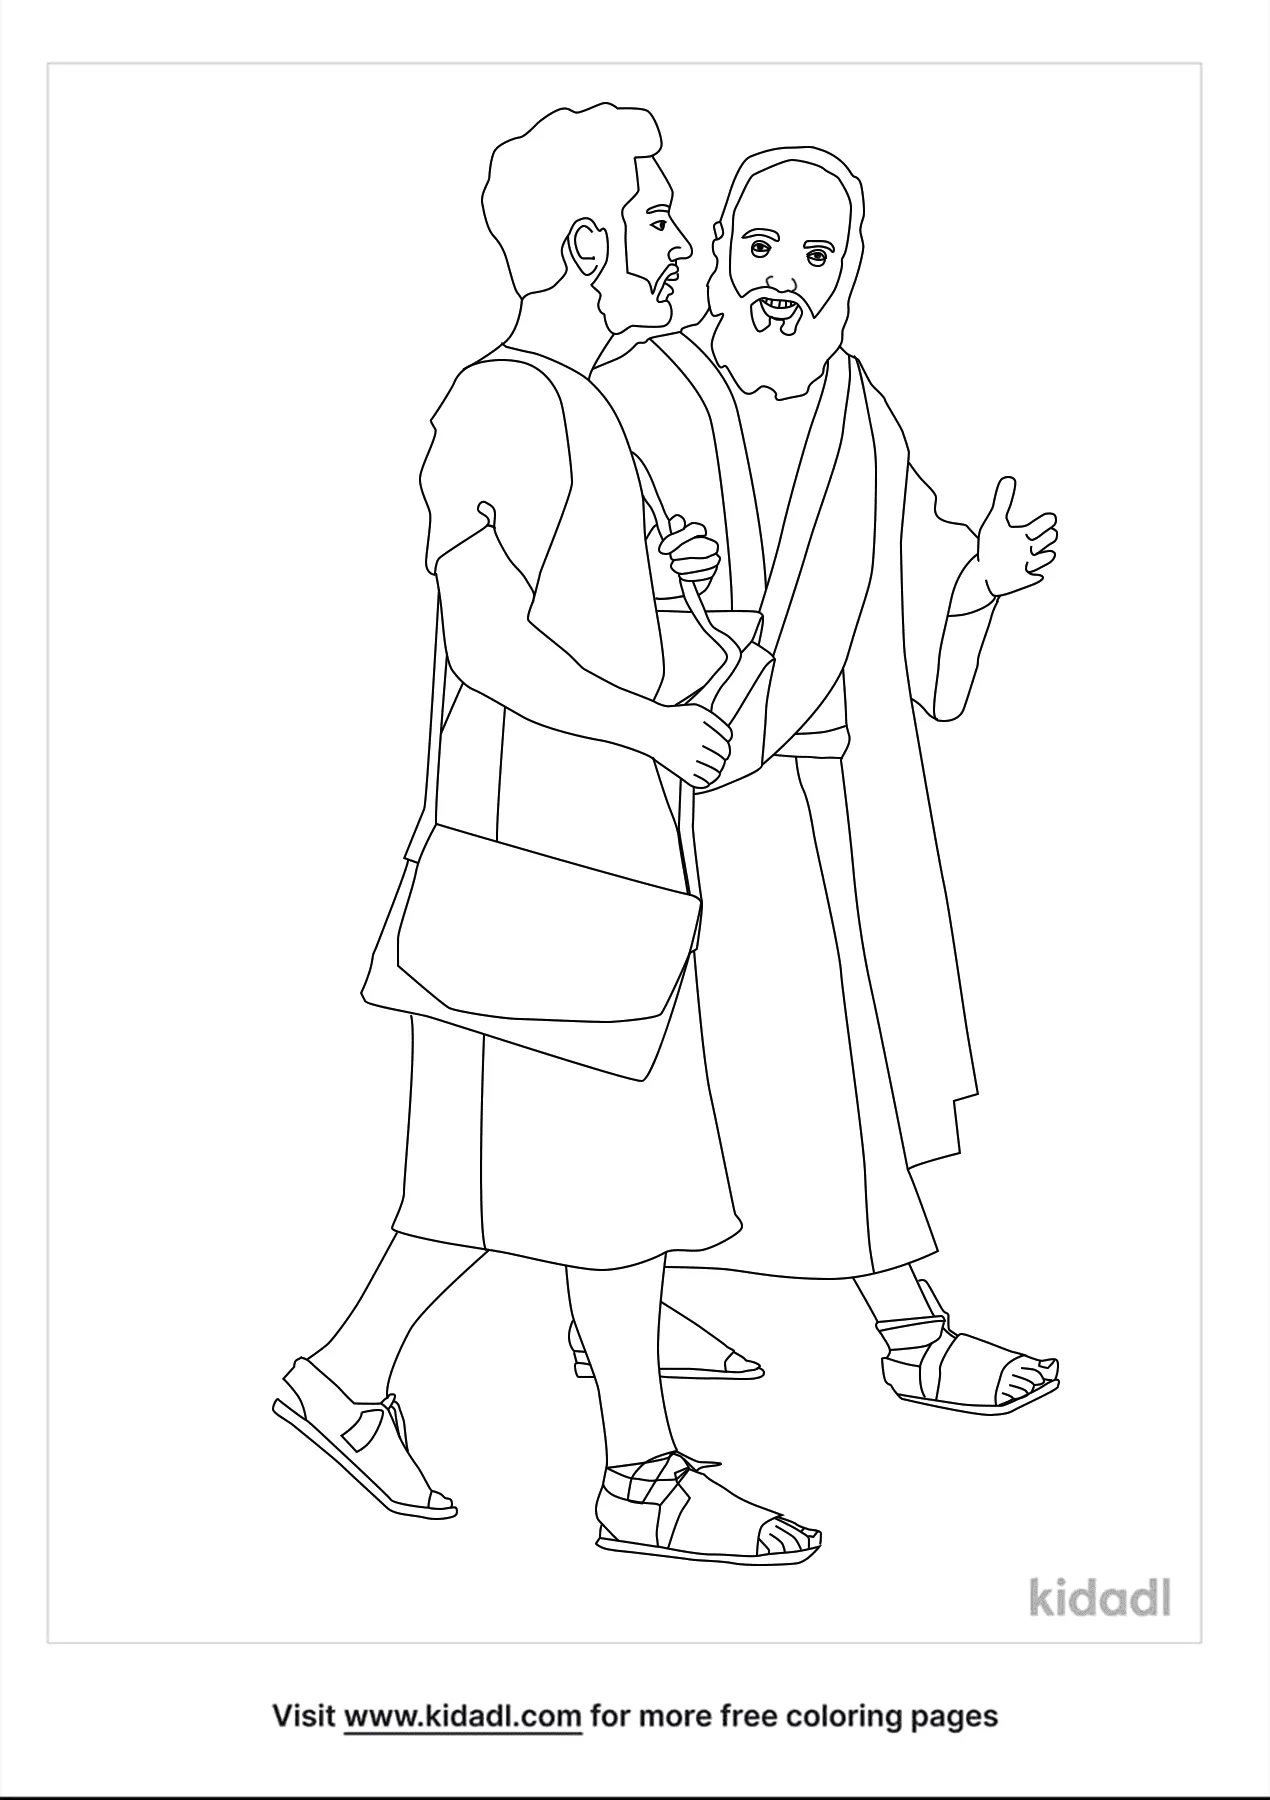 Paul And Timothy Coloring Page | Free Bible Coloring Page | Kidadl